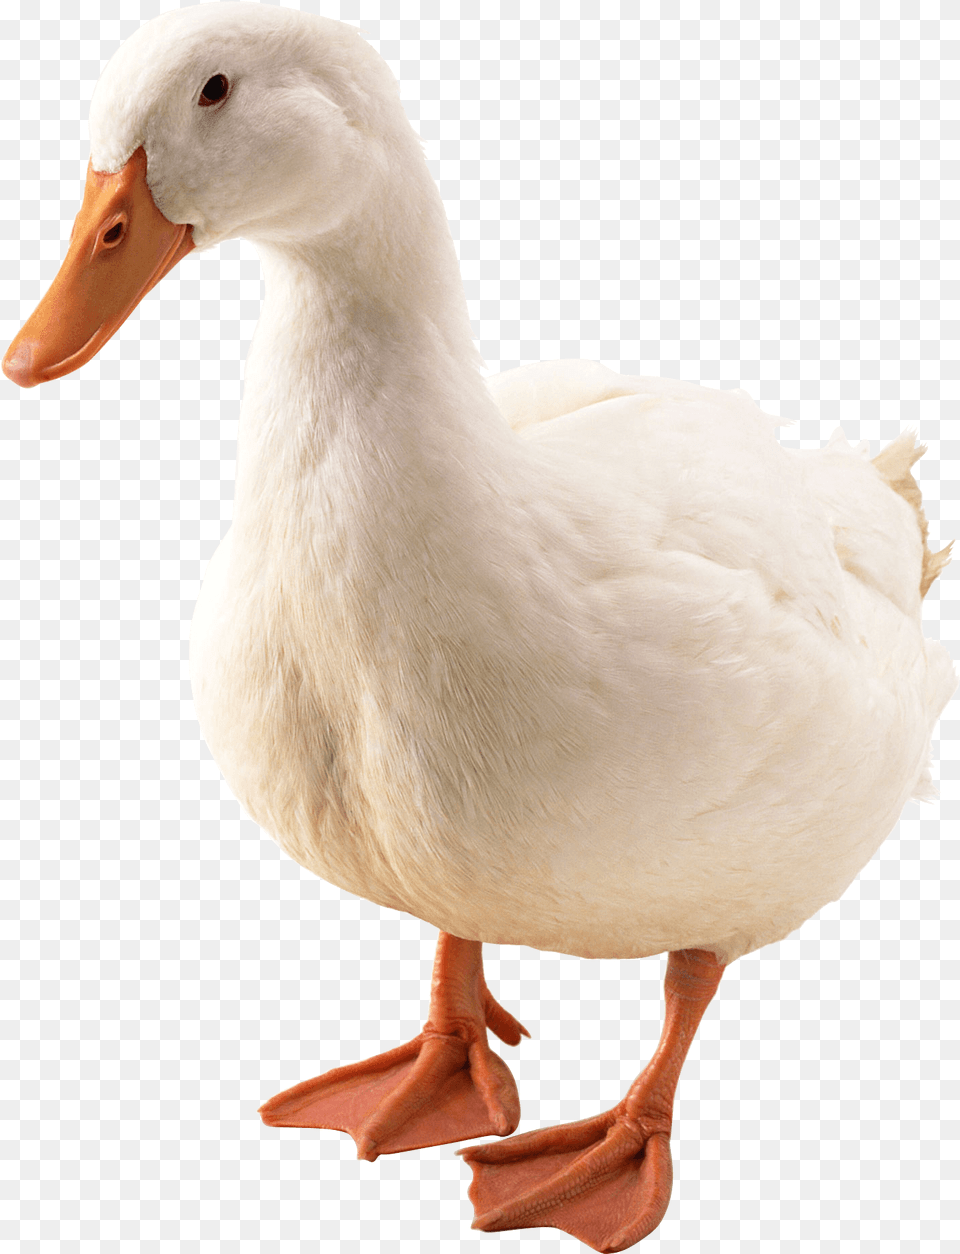 Download Duck Image Hq Duck, Animal, Bird, Anseriformes, Waterfowl Png